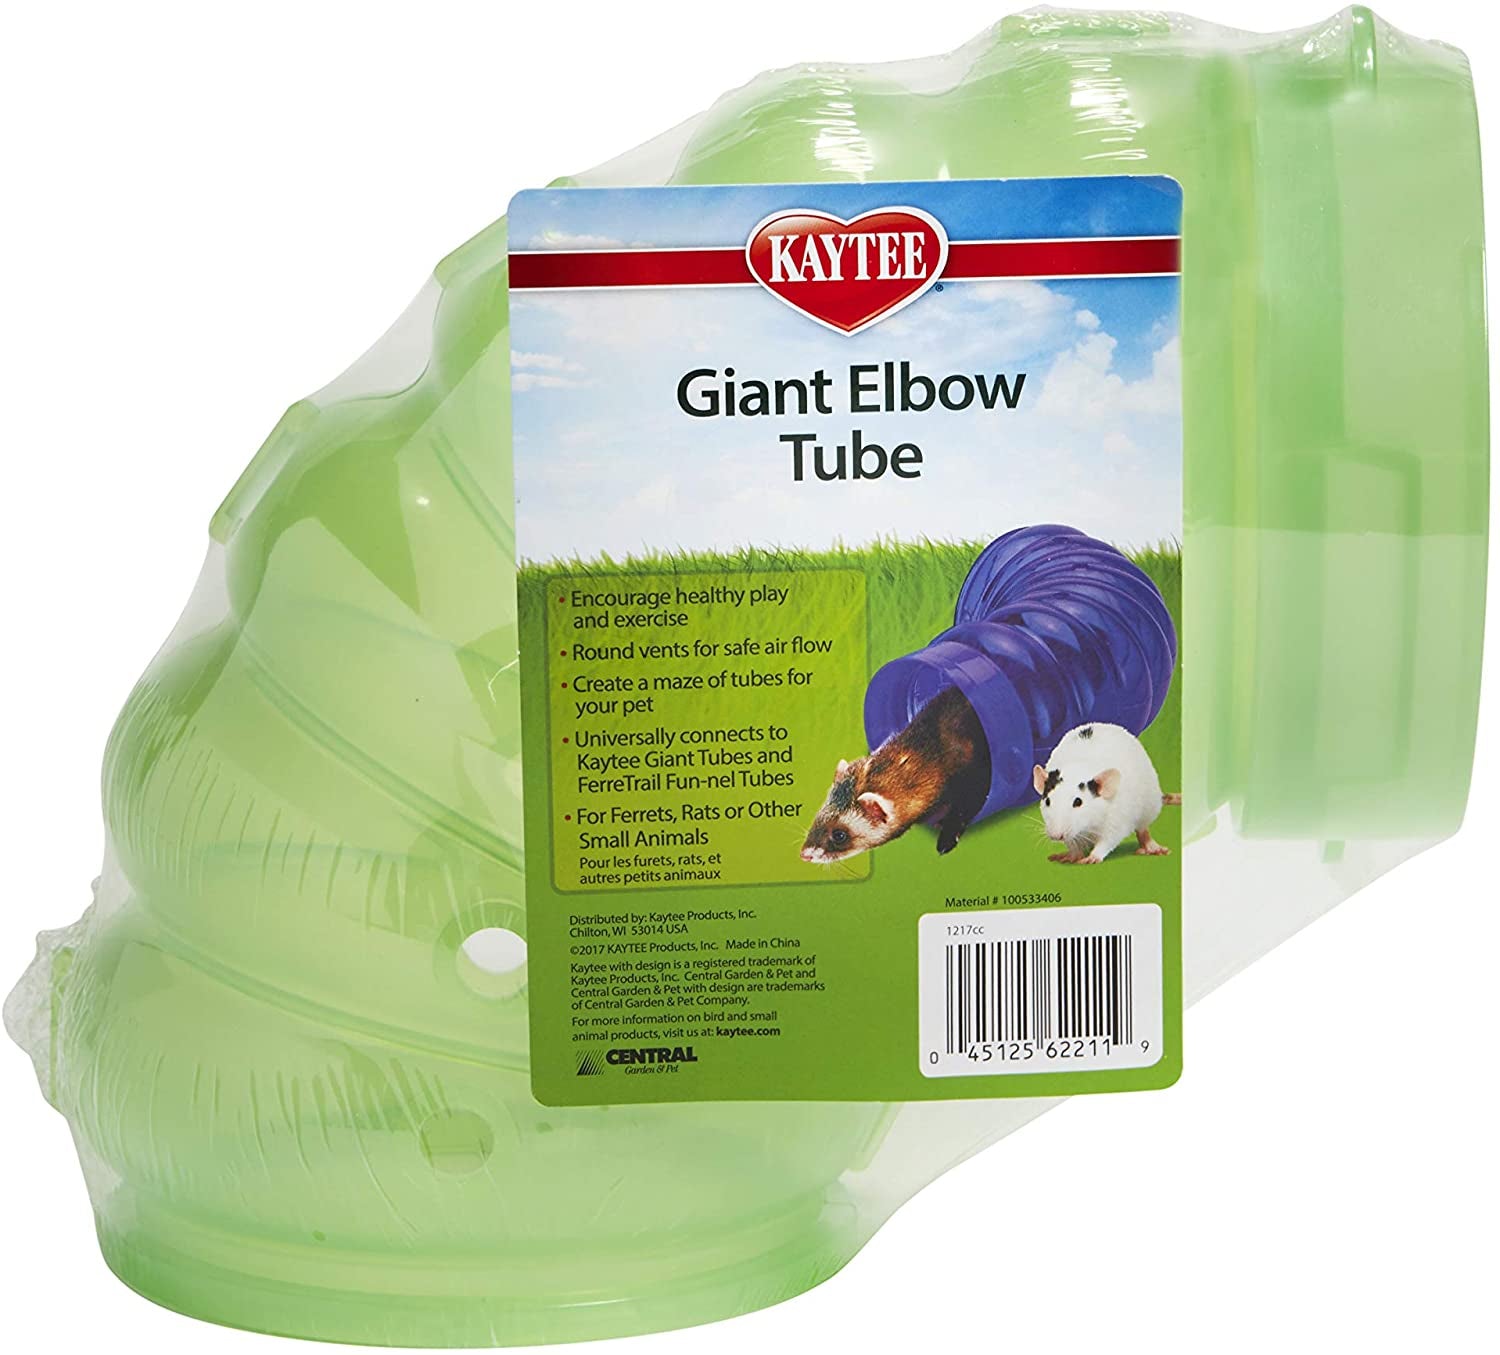 Kaytee Giant Elbow Tube Connects to Giant Tubes and FerreTrail Fun-nel Tubes for Small Pets